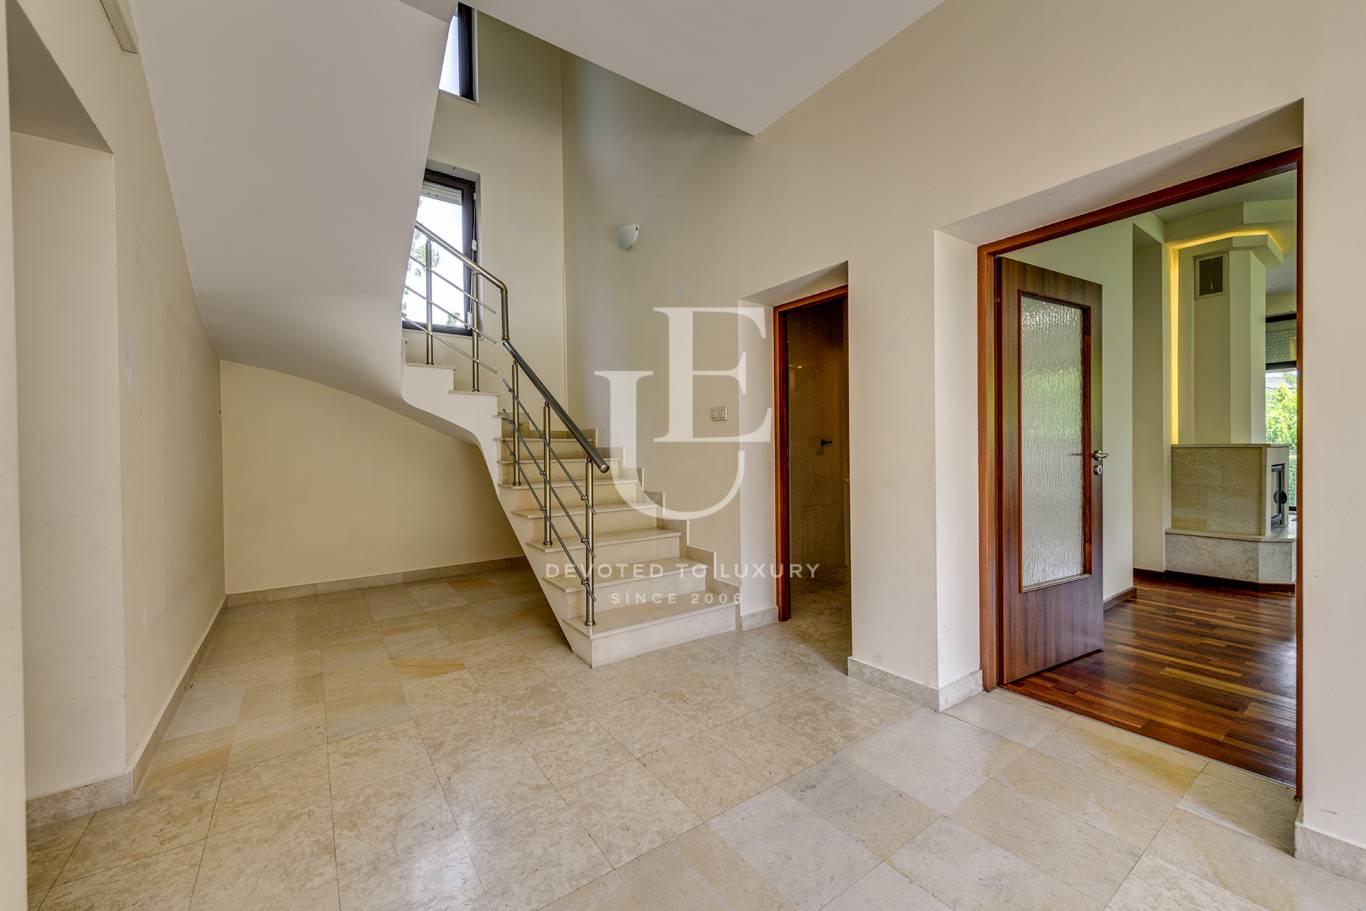 House for rent in Sofia, Dragalevtsi with listing ID: K7471 - image 10